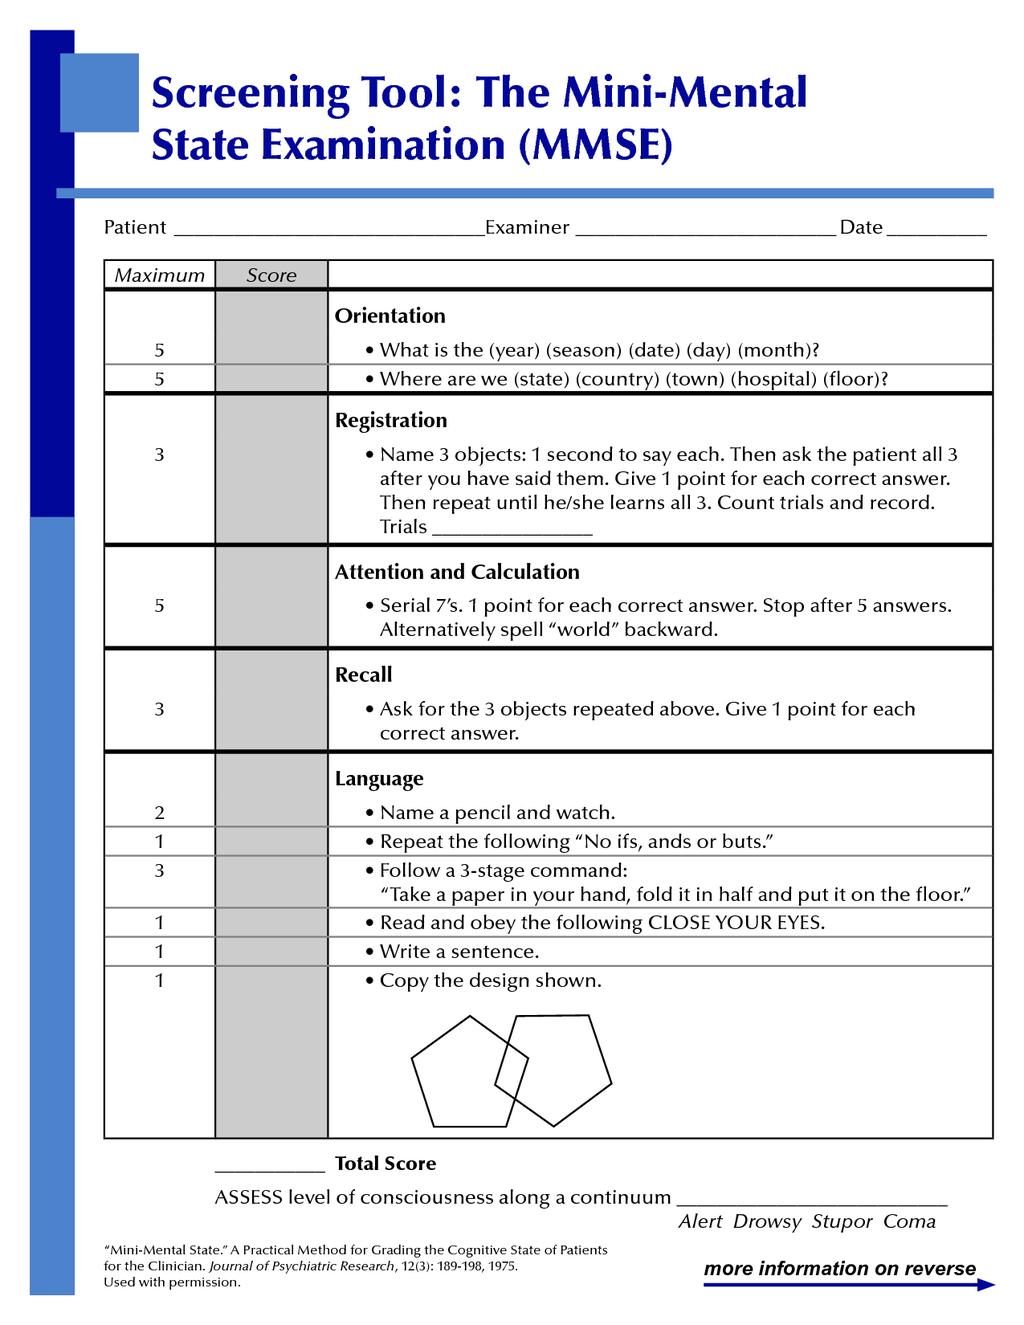 NCF Test Selection Mini-mental state examination (MMSE)! short, 30 items, widely available!